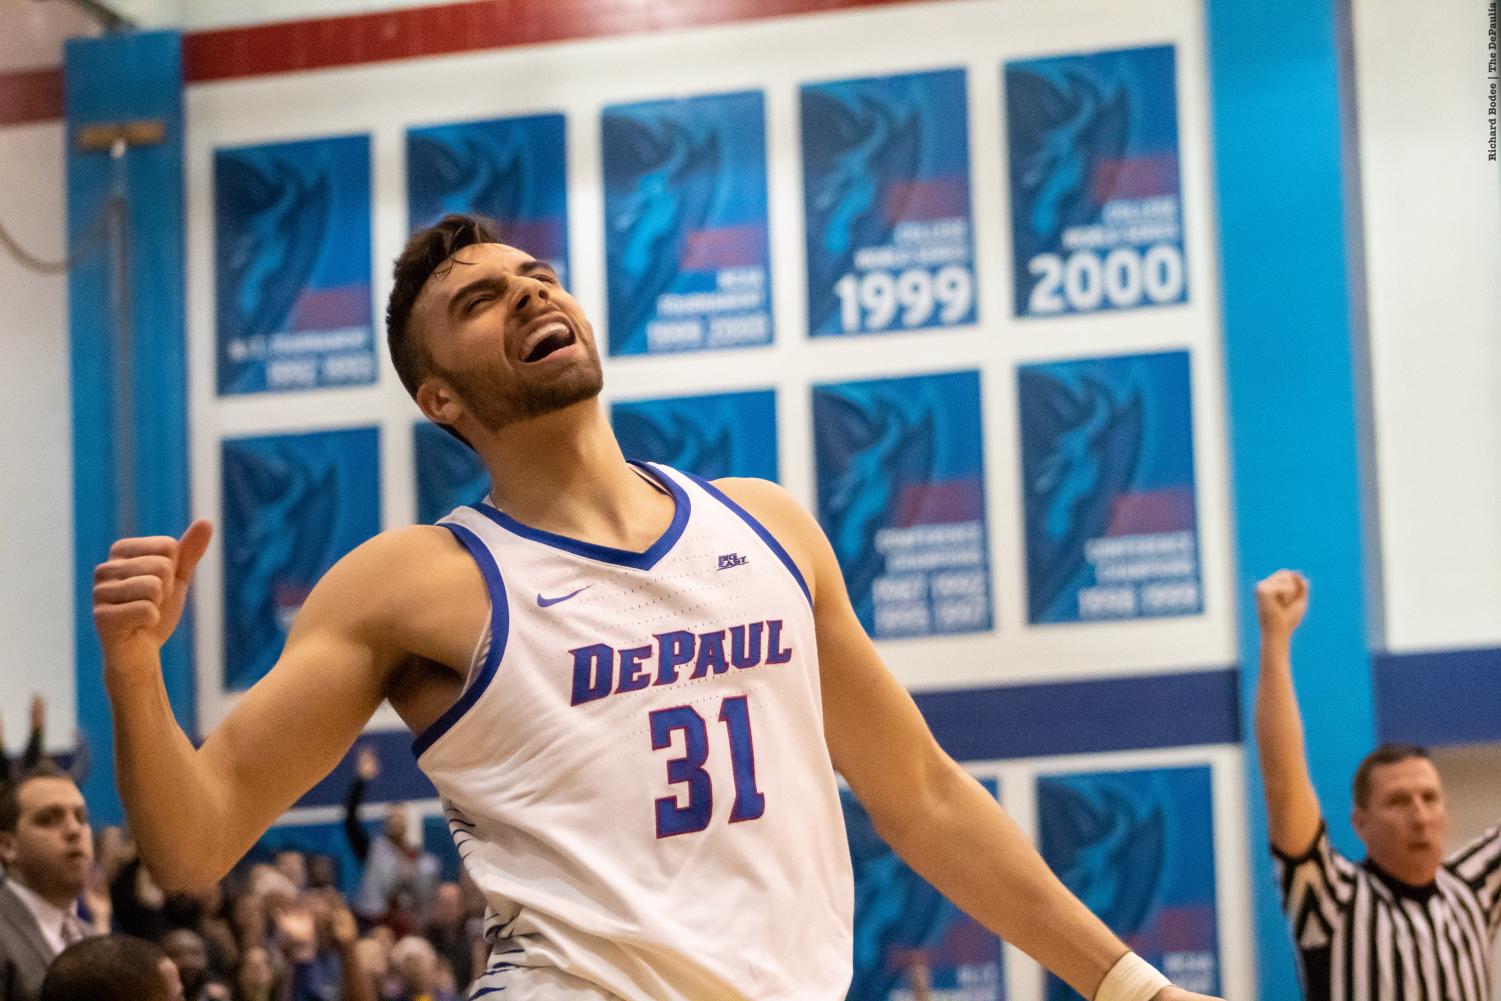 Photo+Gallery%3A+DePaul+loses+final+game+of+the+CBI+championship+series+77-65+to+USF